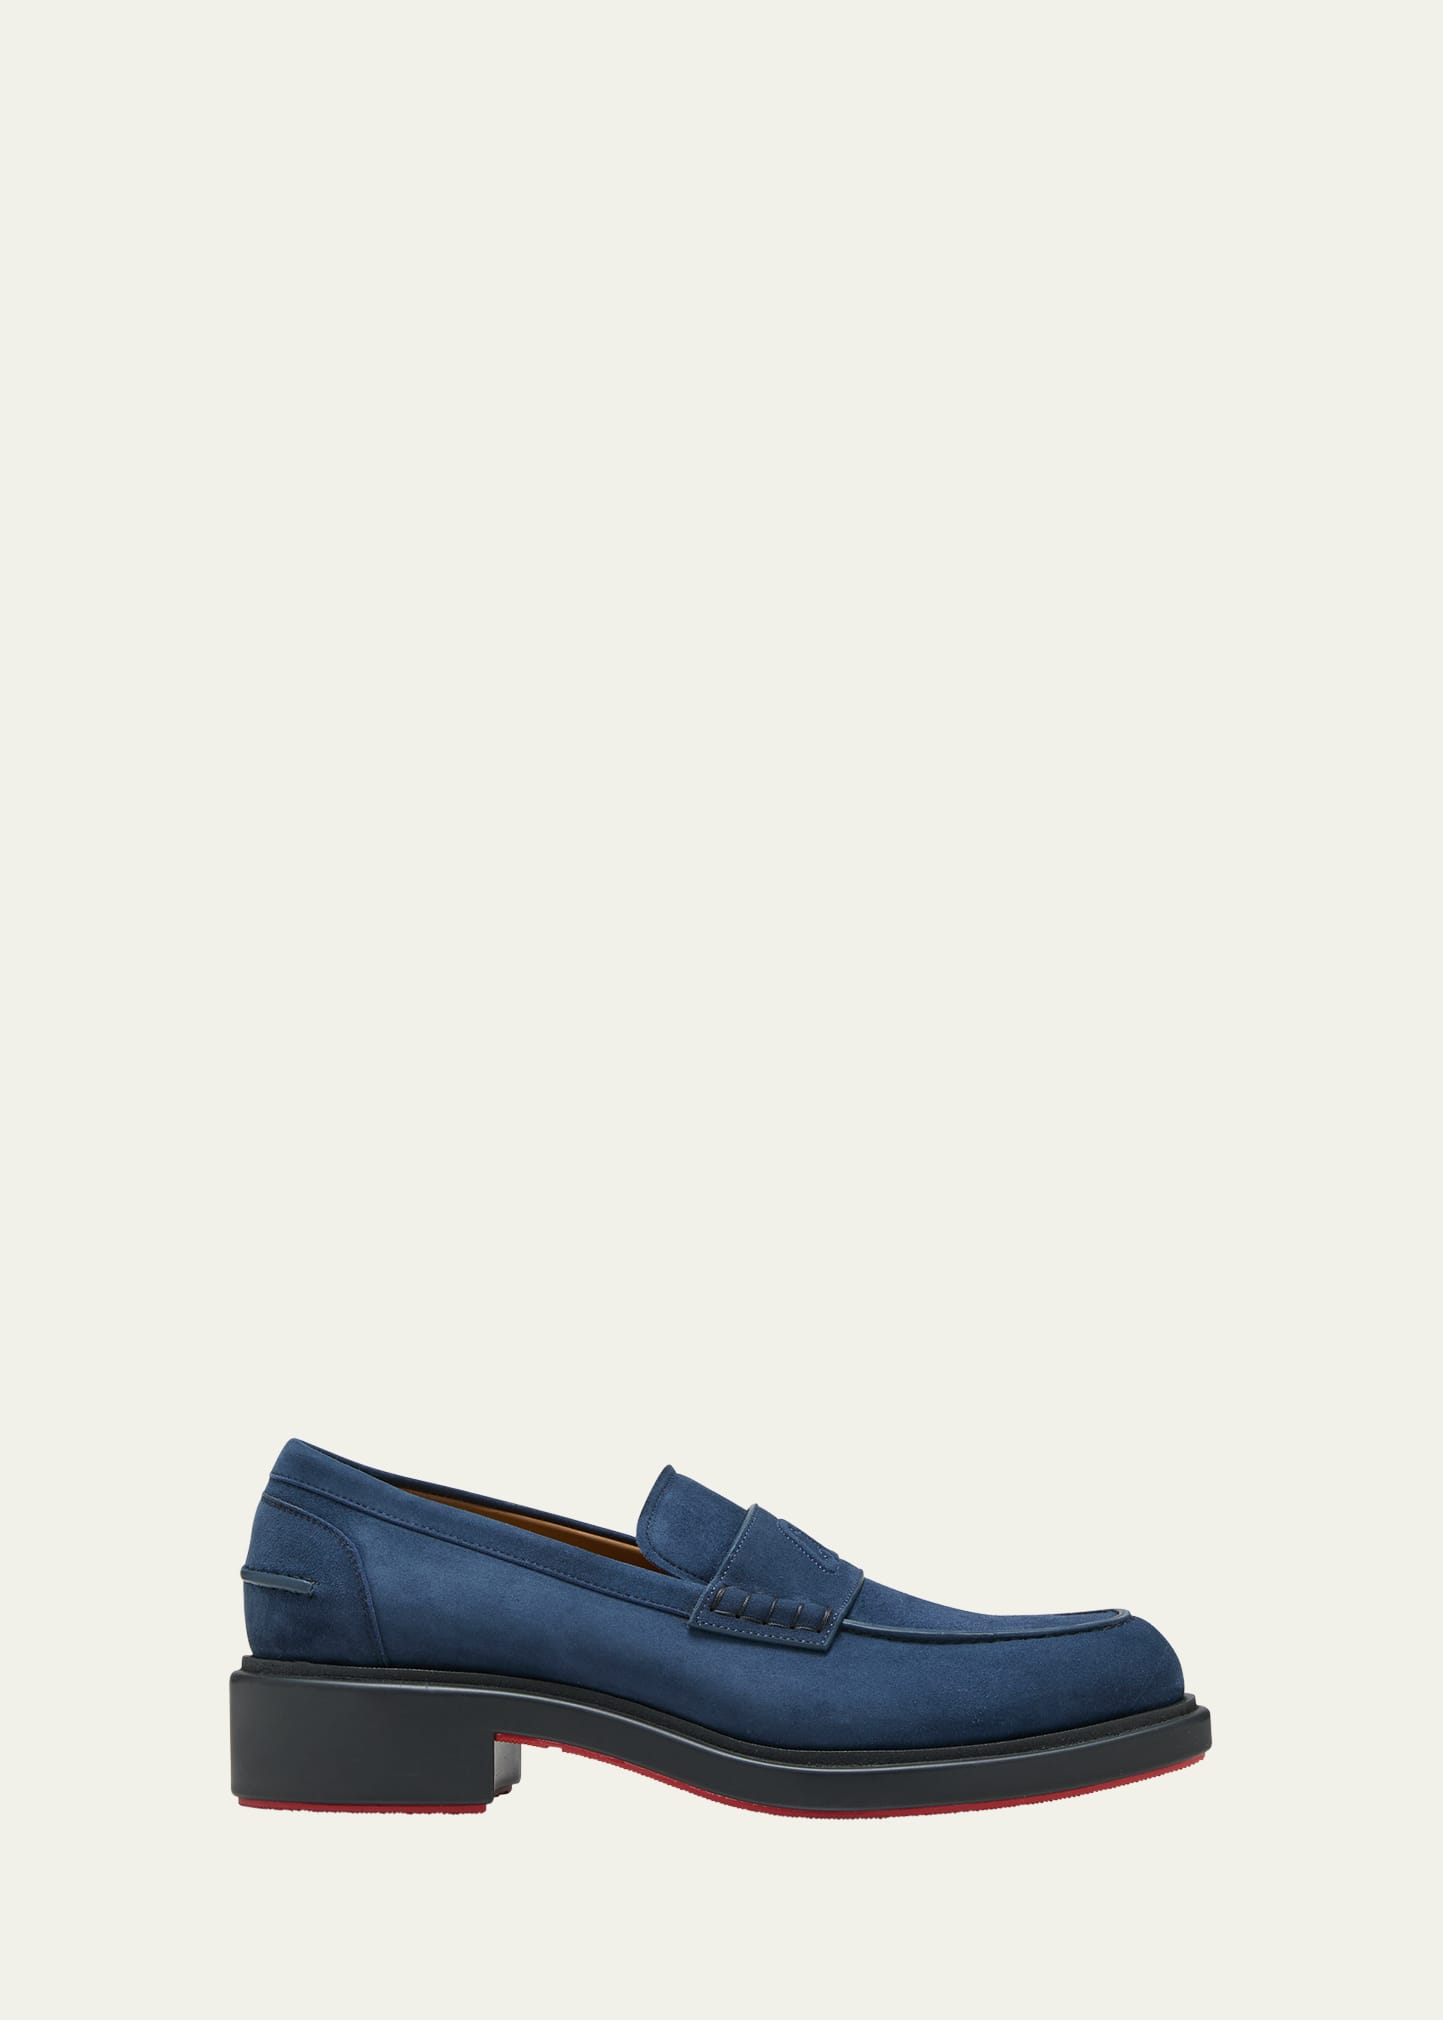 Shop Christian Louboutin Men's Urbino Moc Cl Suede Penny Loafers In Marine